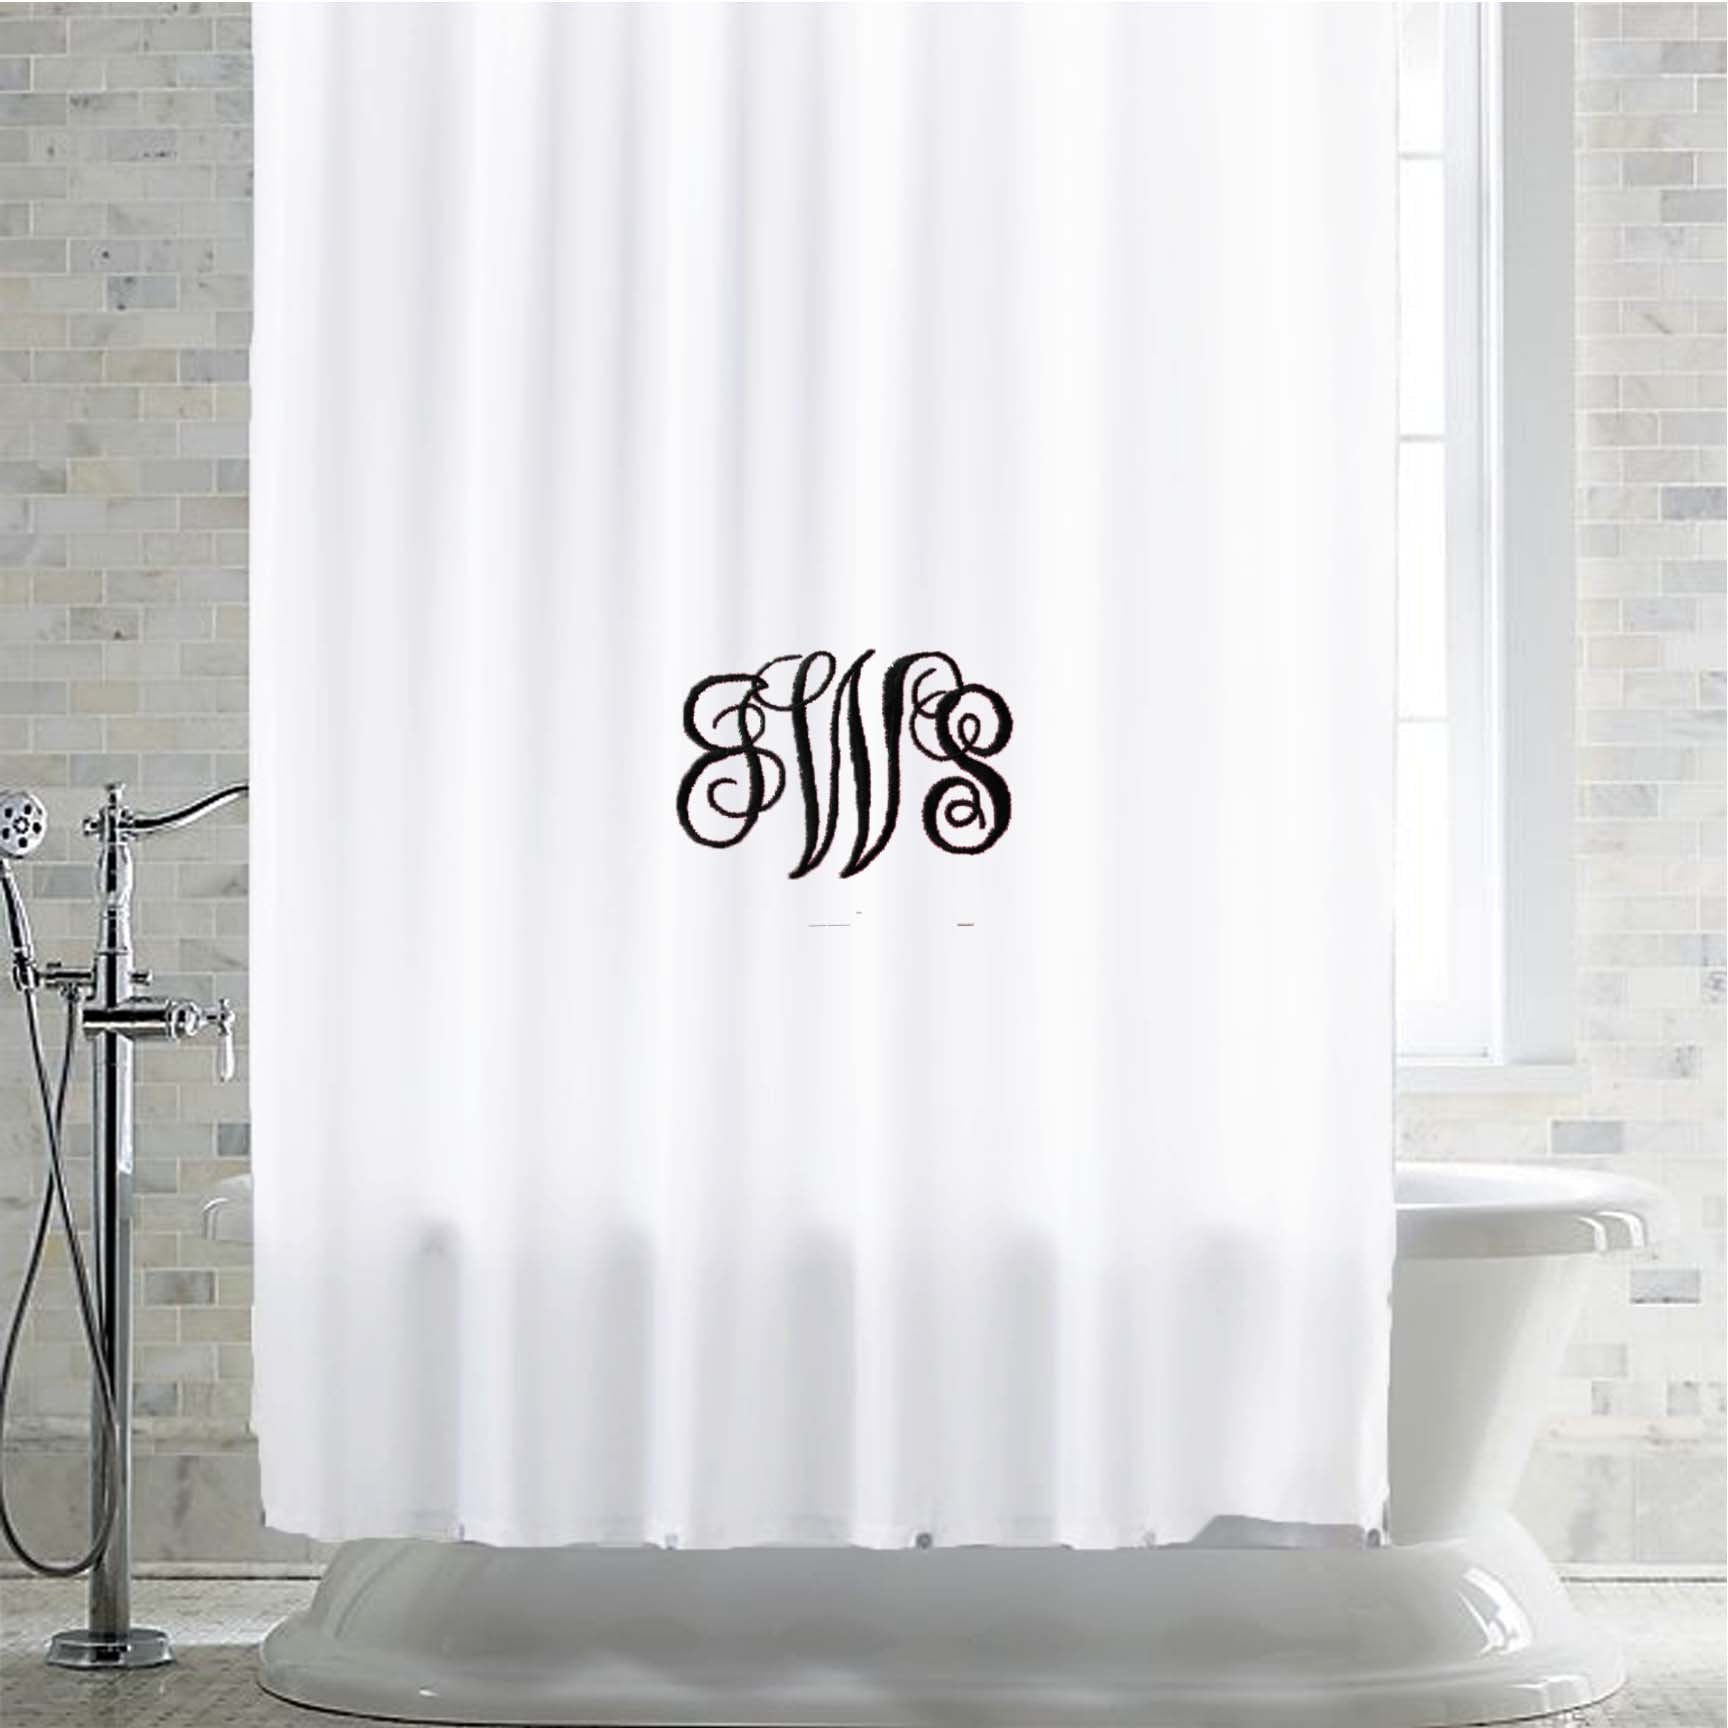 Amore Beaute white shower curtain panel is monogrammed in font style and thread color of your choice.